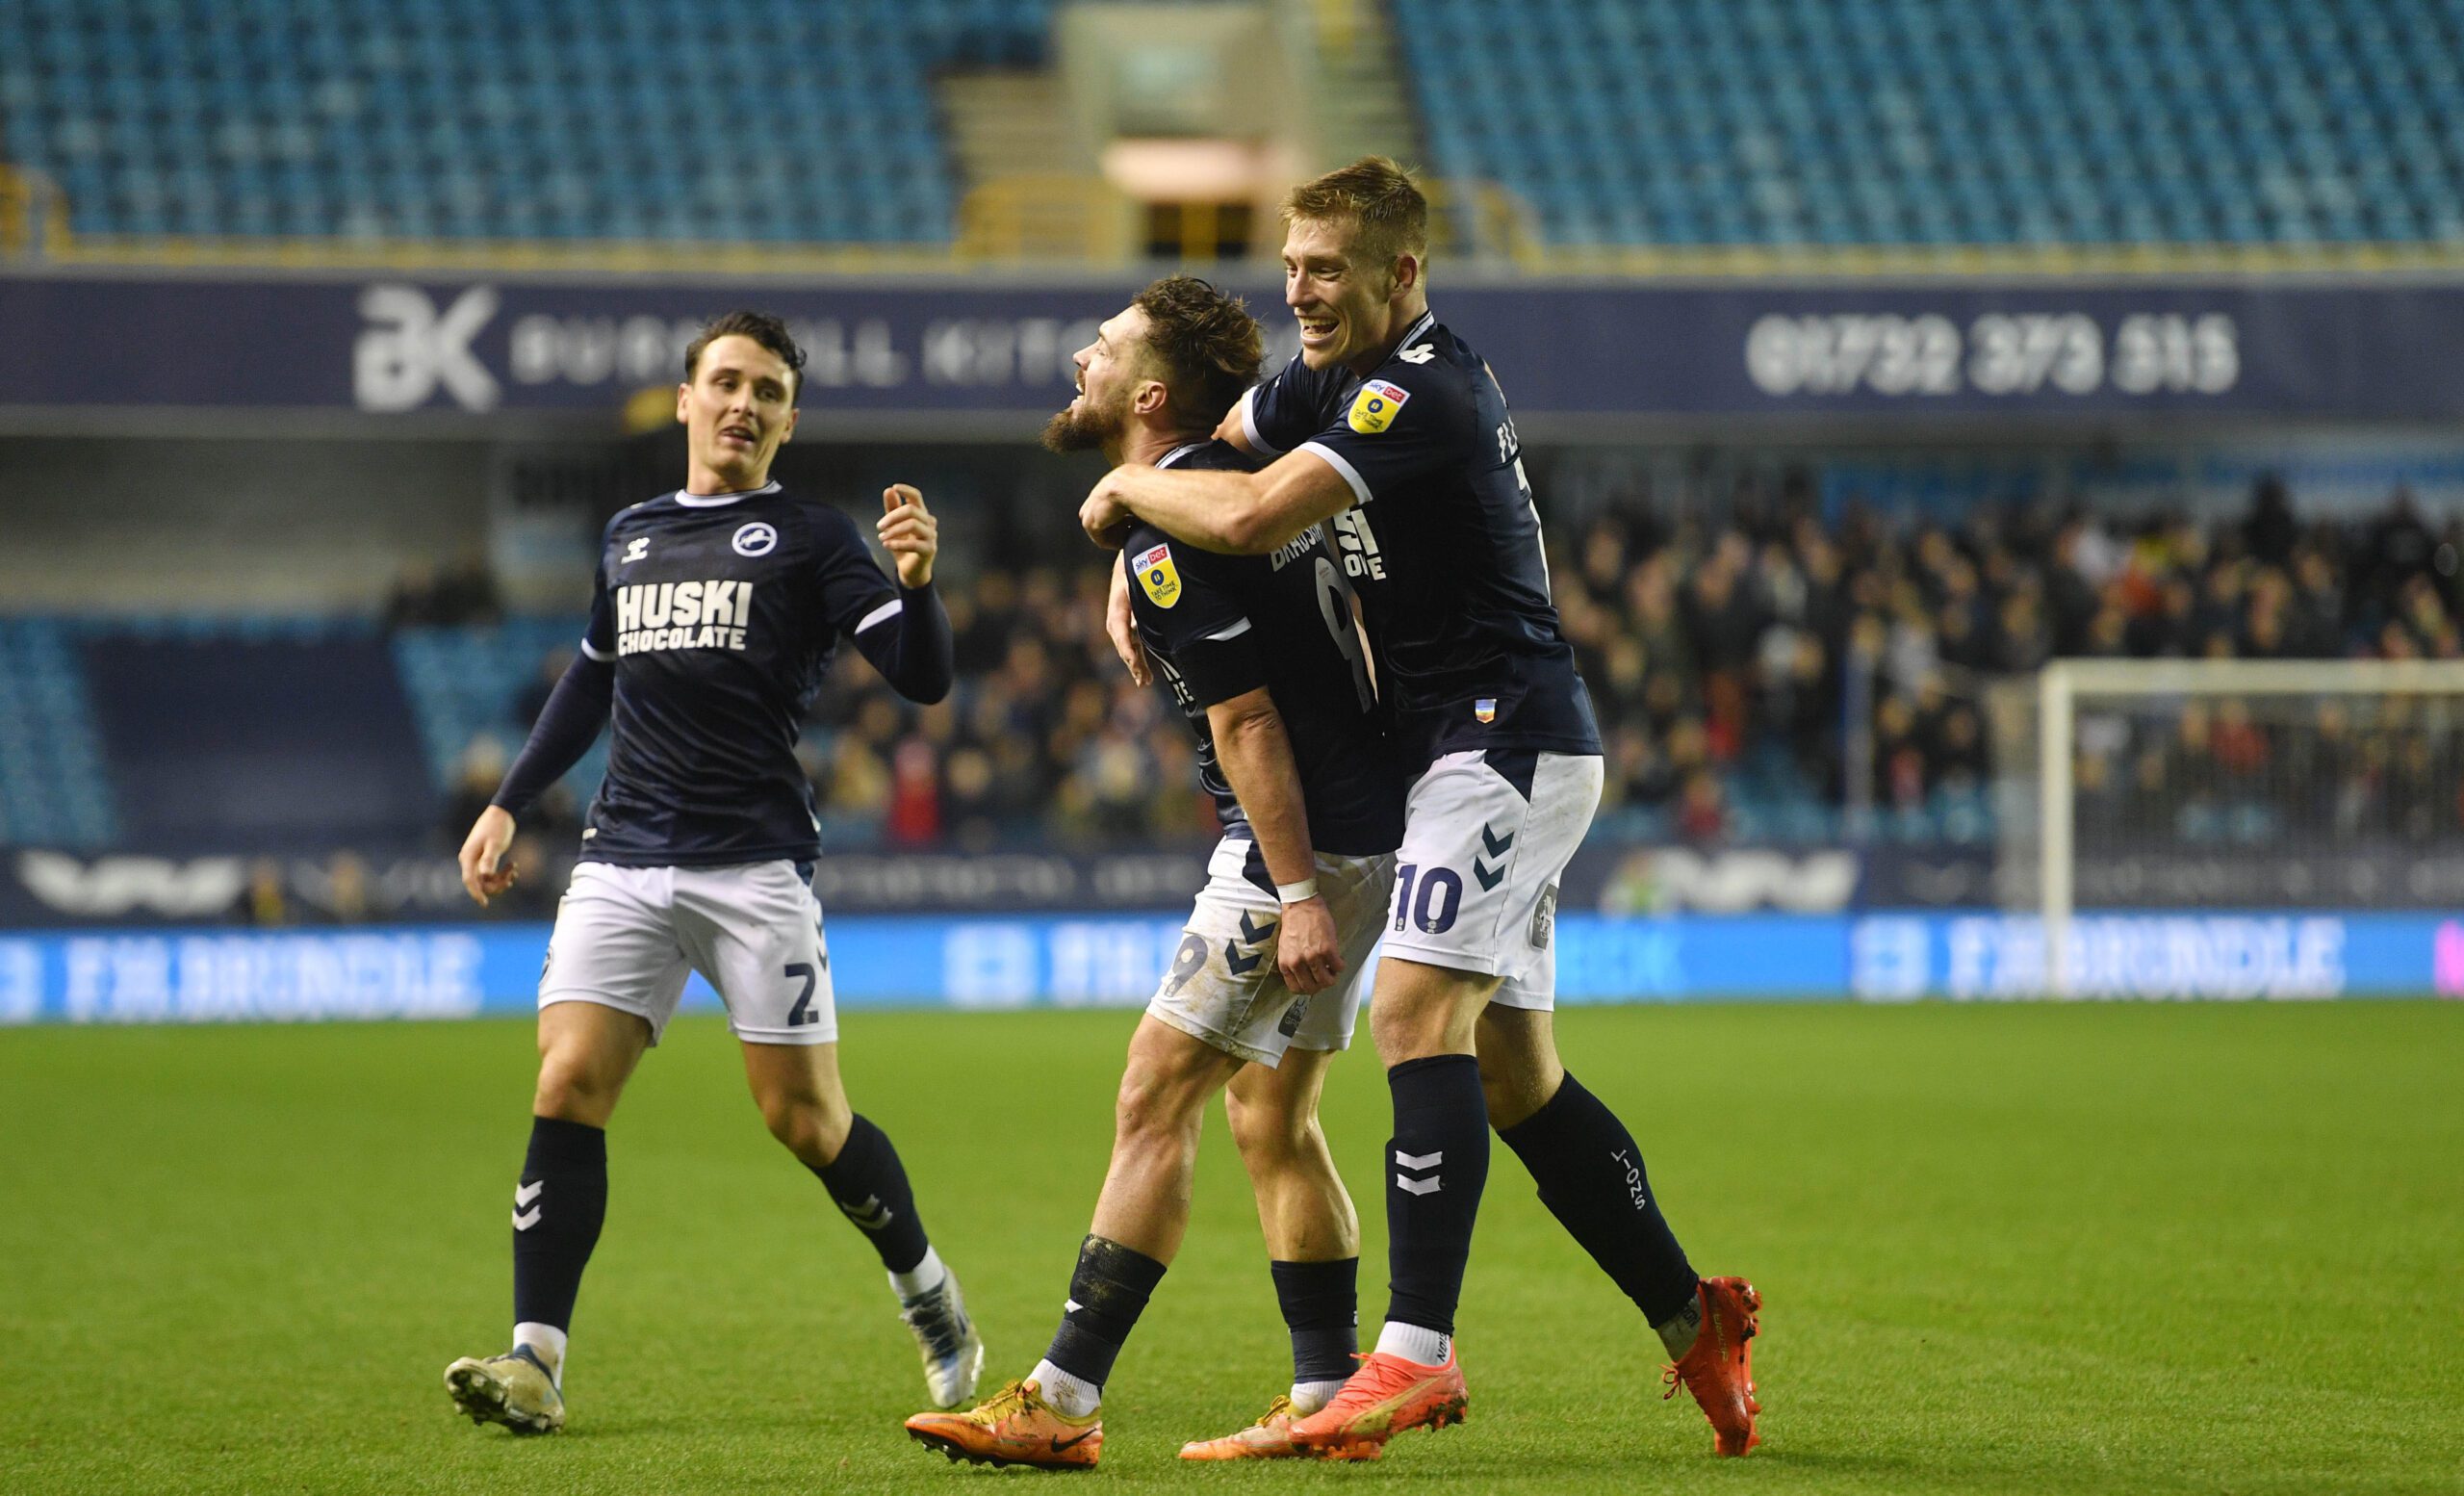 Millwall 1-0 Rotherham: Lions secure narrow win over 10-man